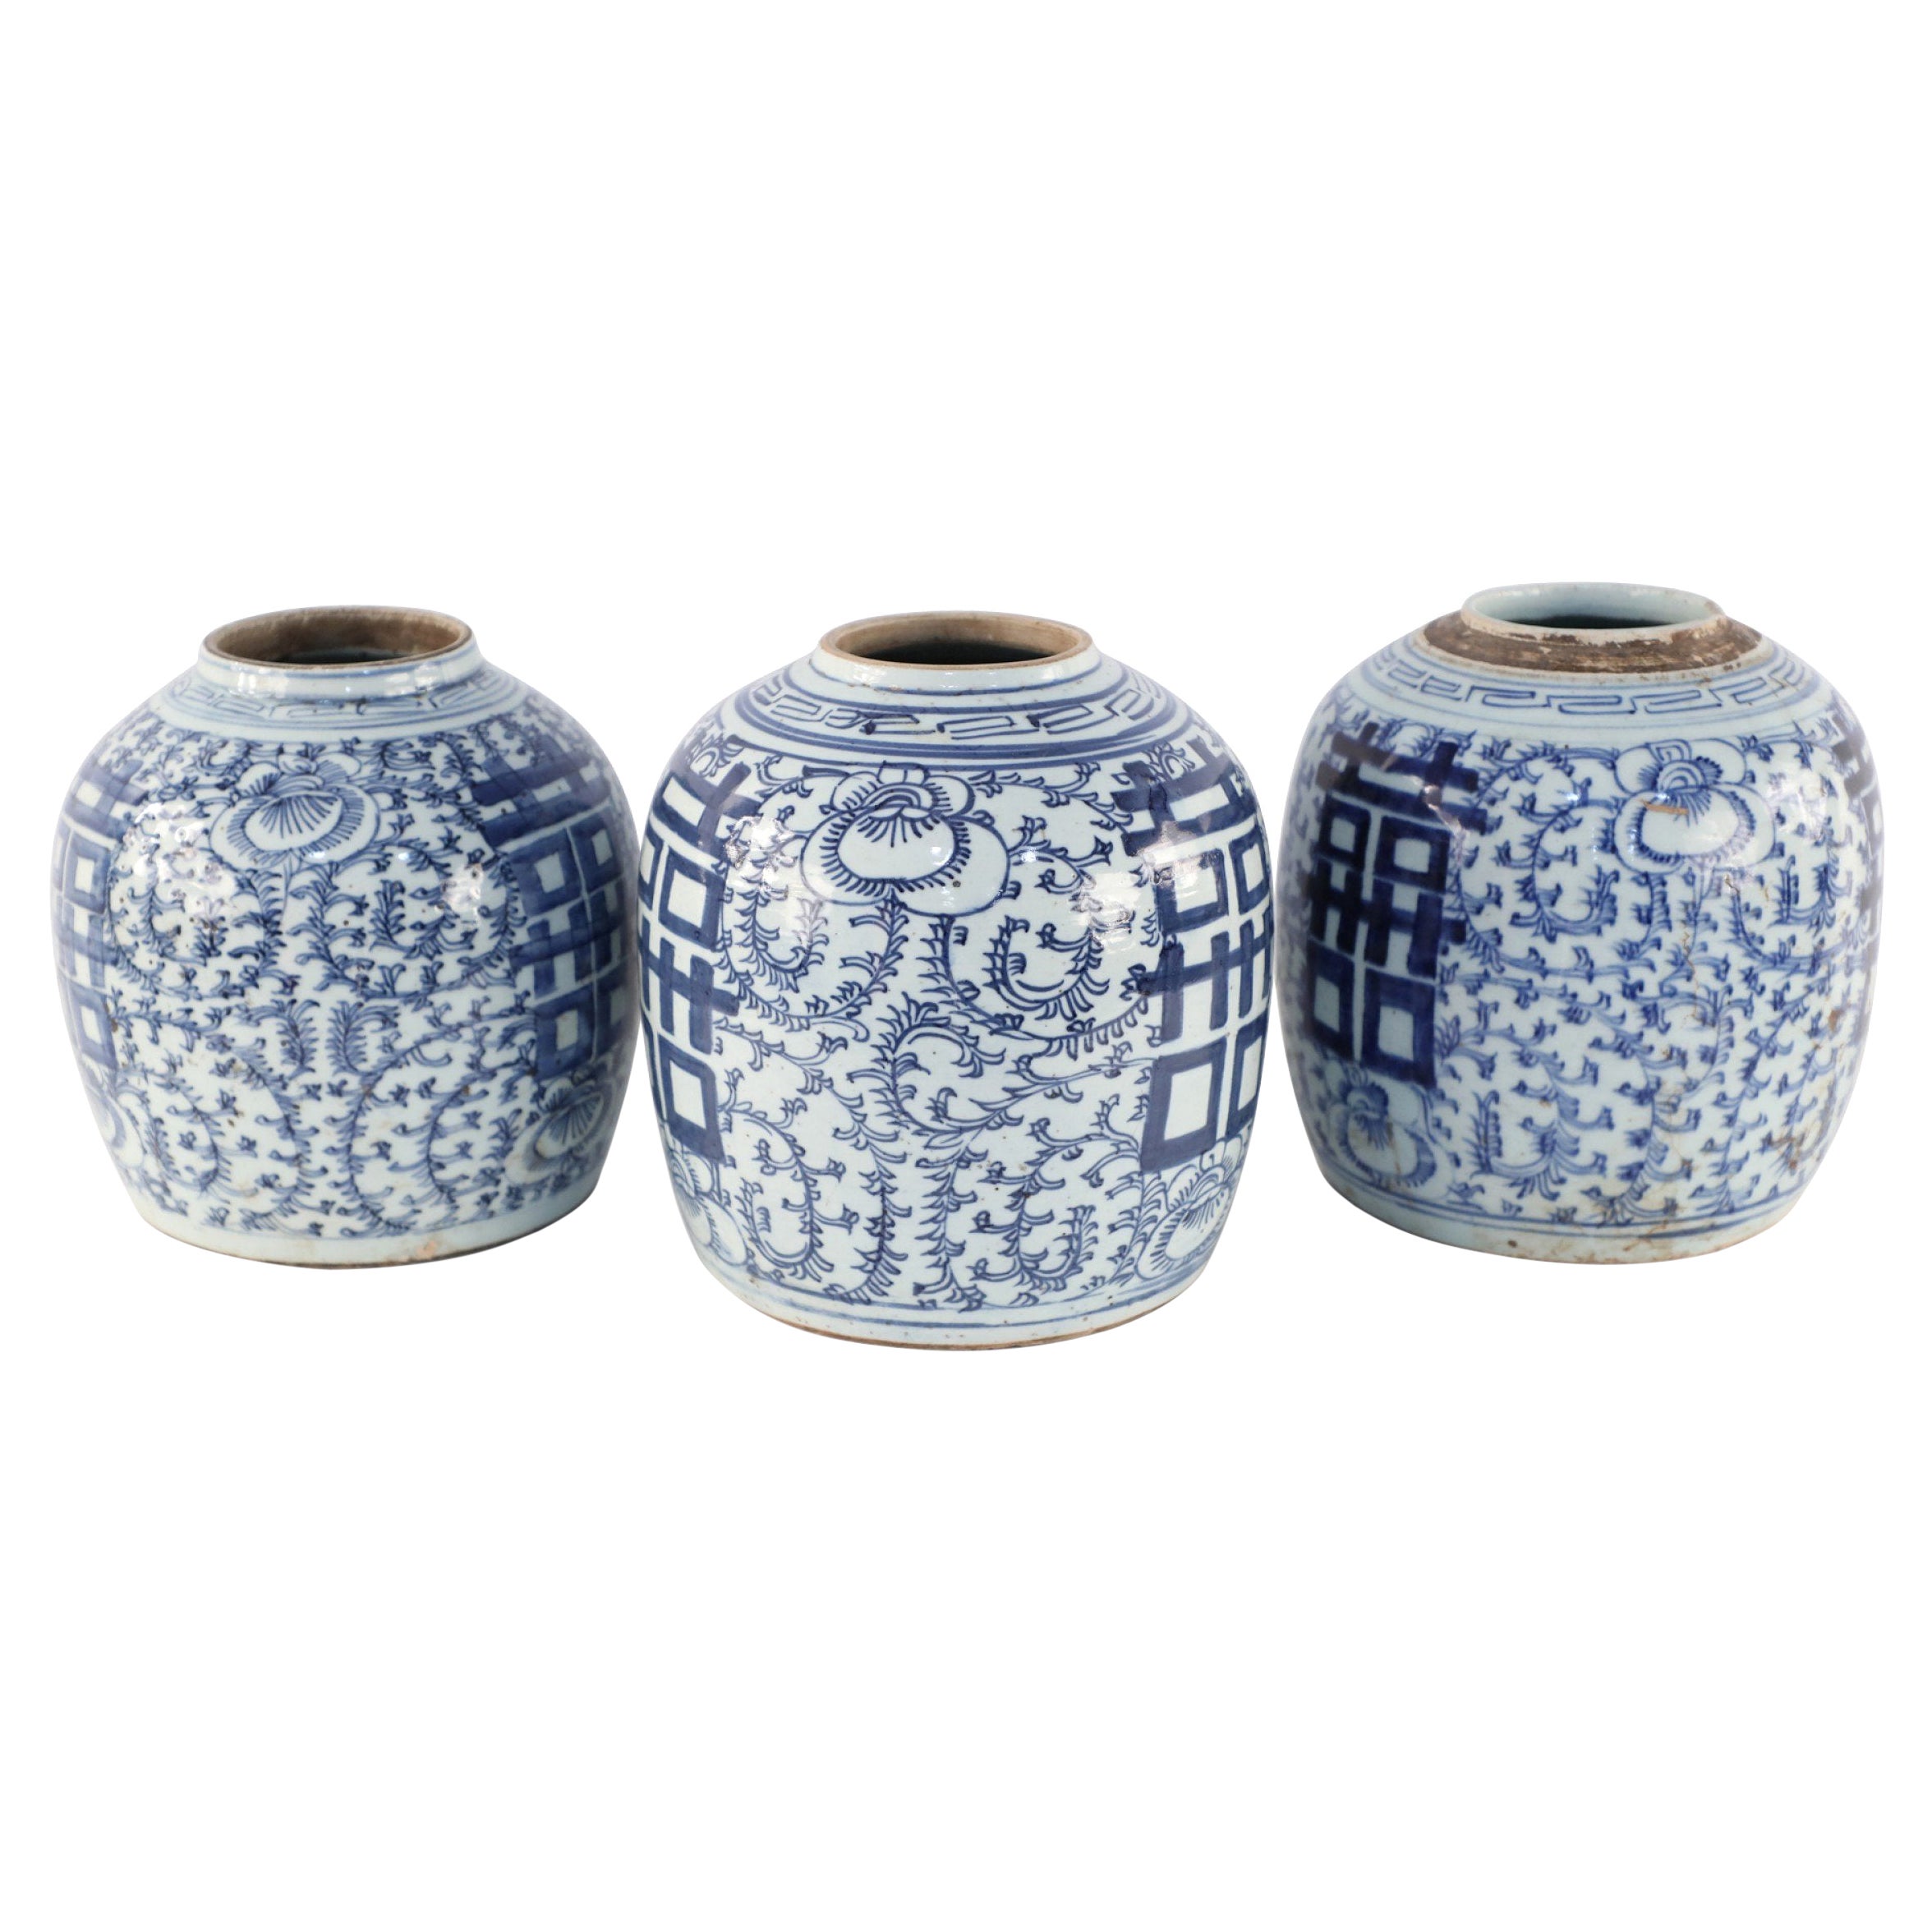 Chinese White and Blue Floral Ginger Jar Vases